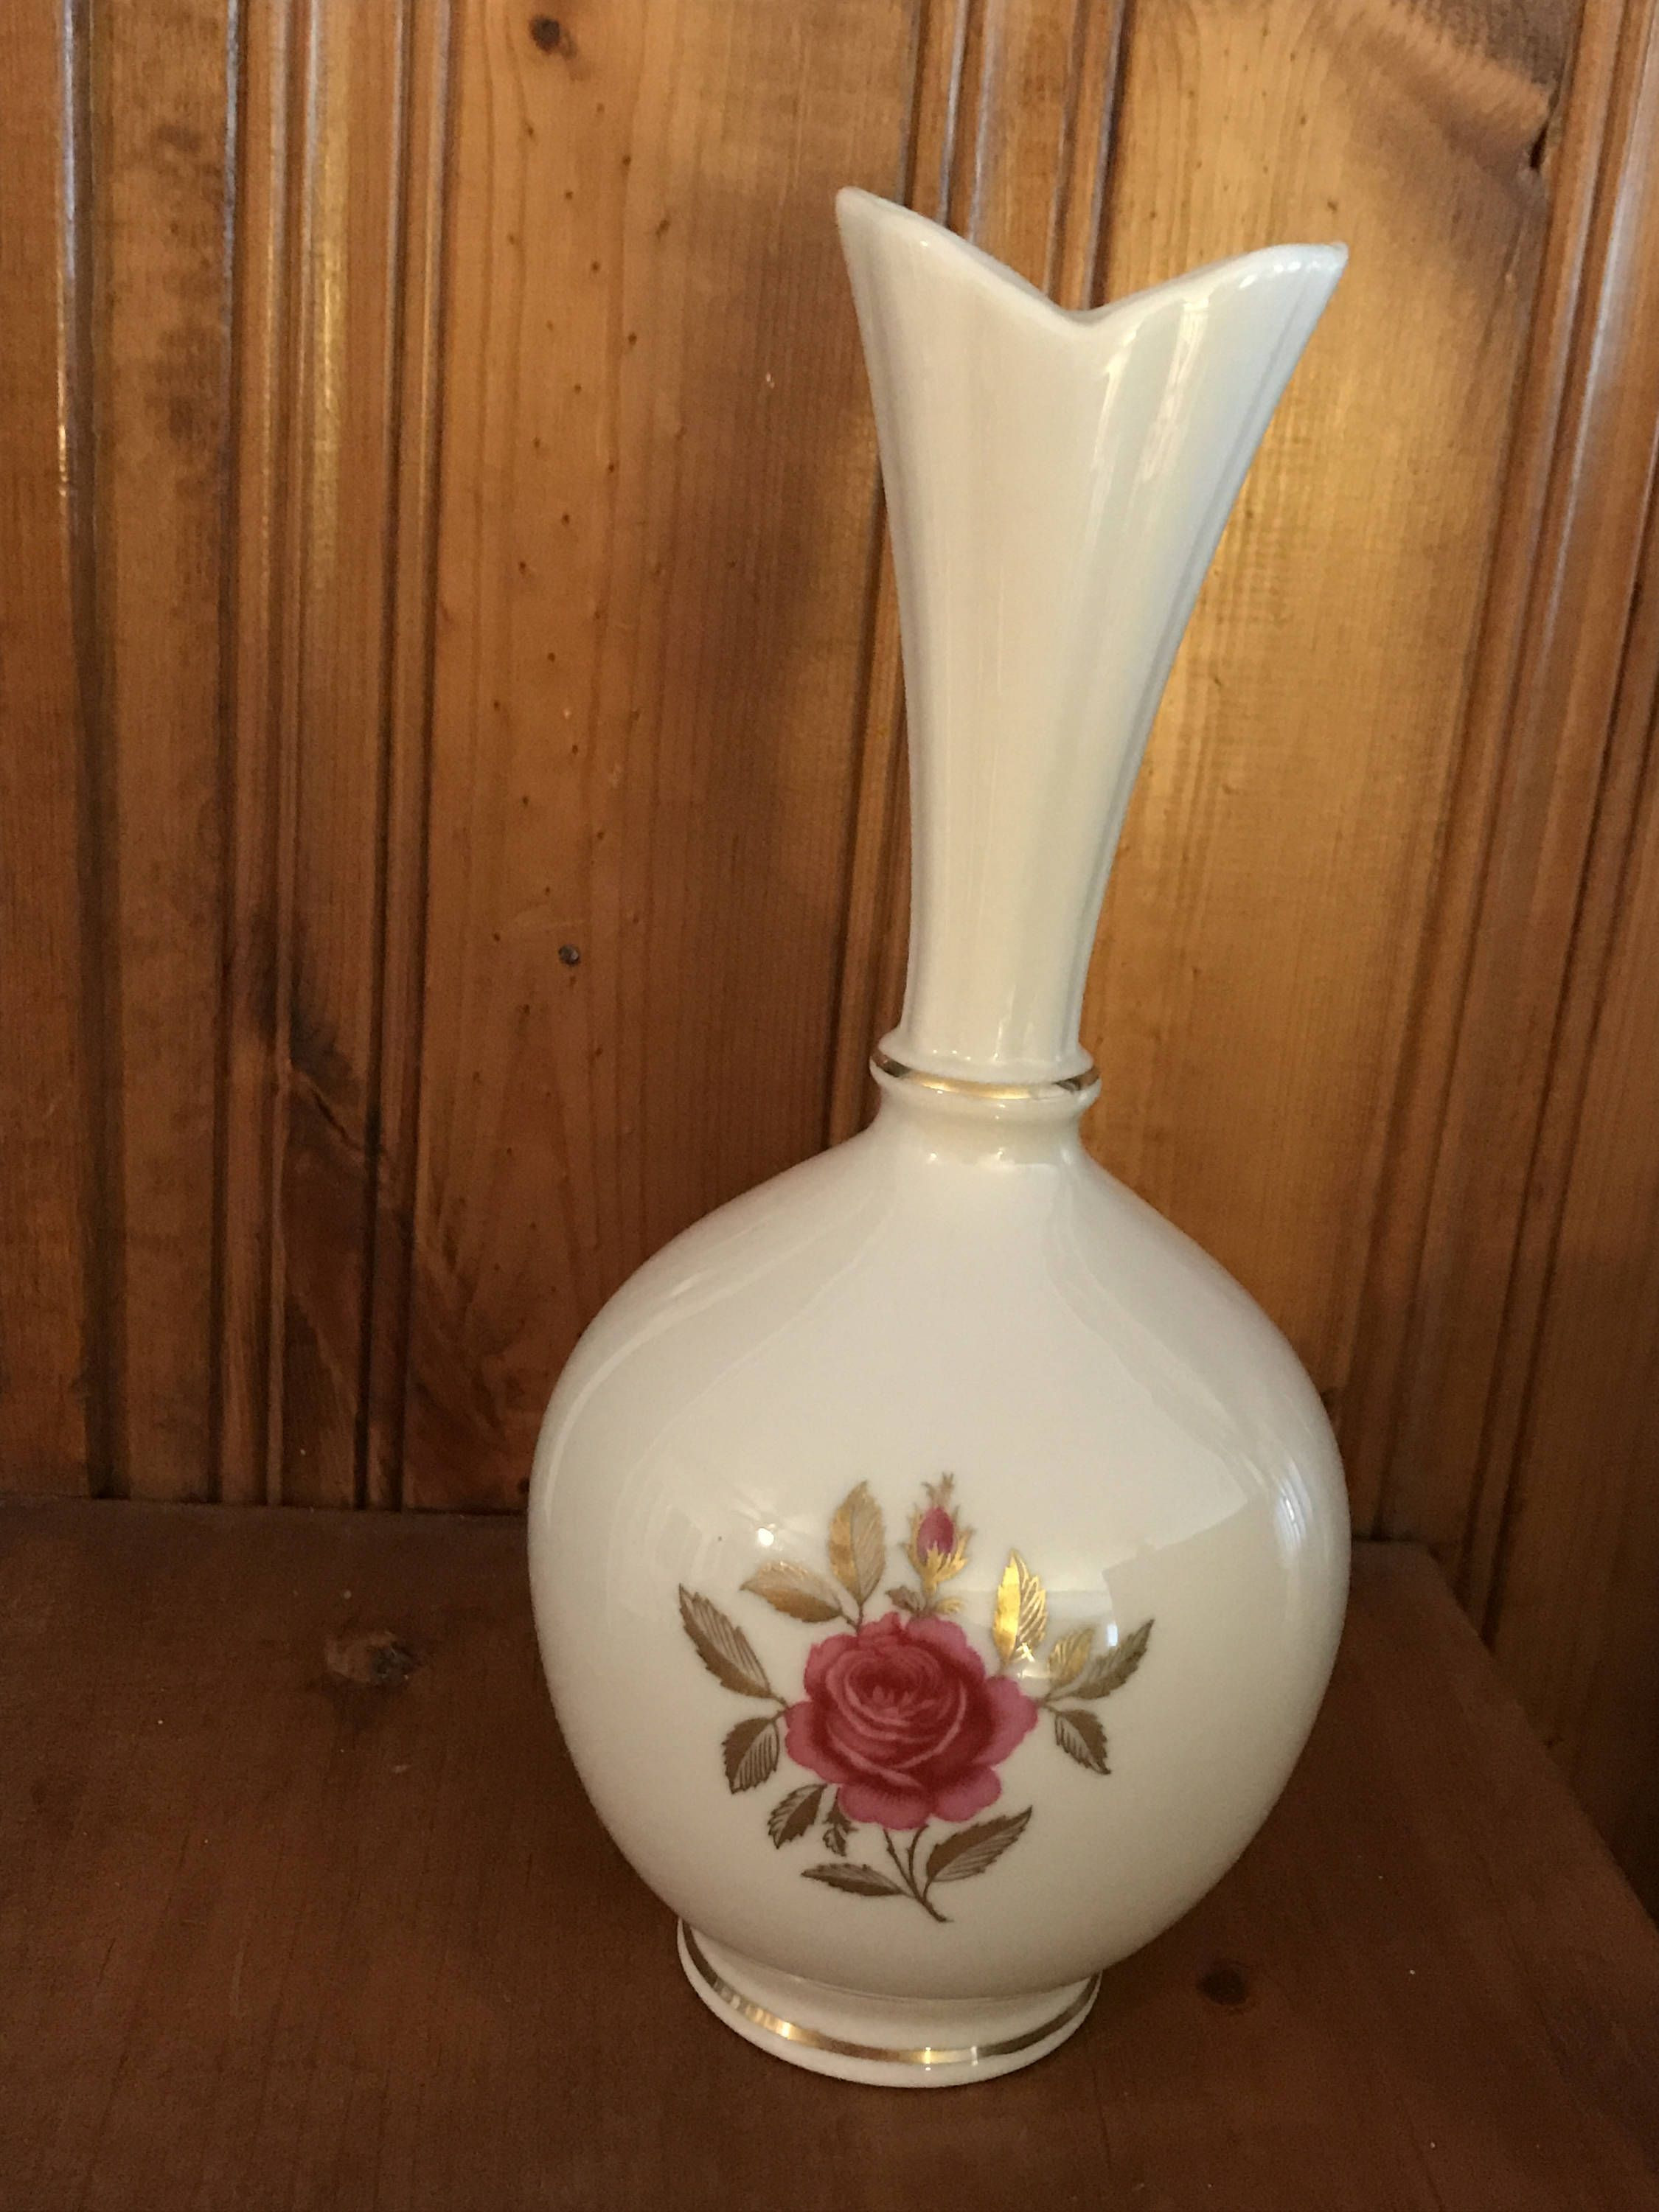 15 Best Lenox Rose Vase Gold Trim 2024 free download lenox rose vase gold trim of vintage lenox floral rose bud vase with 24kt gold trim rose buds regarding vintage lenox floral rose bud vase with 24kt gold trim by thecountrycowshed on etsy